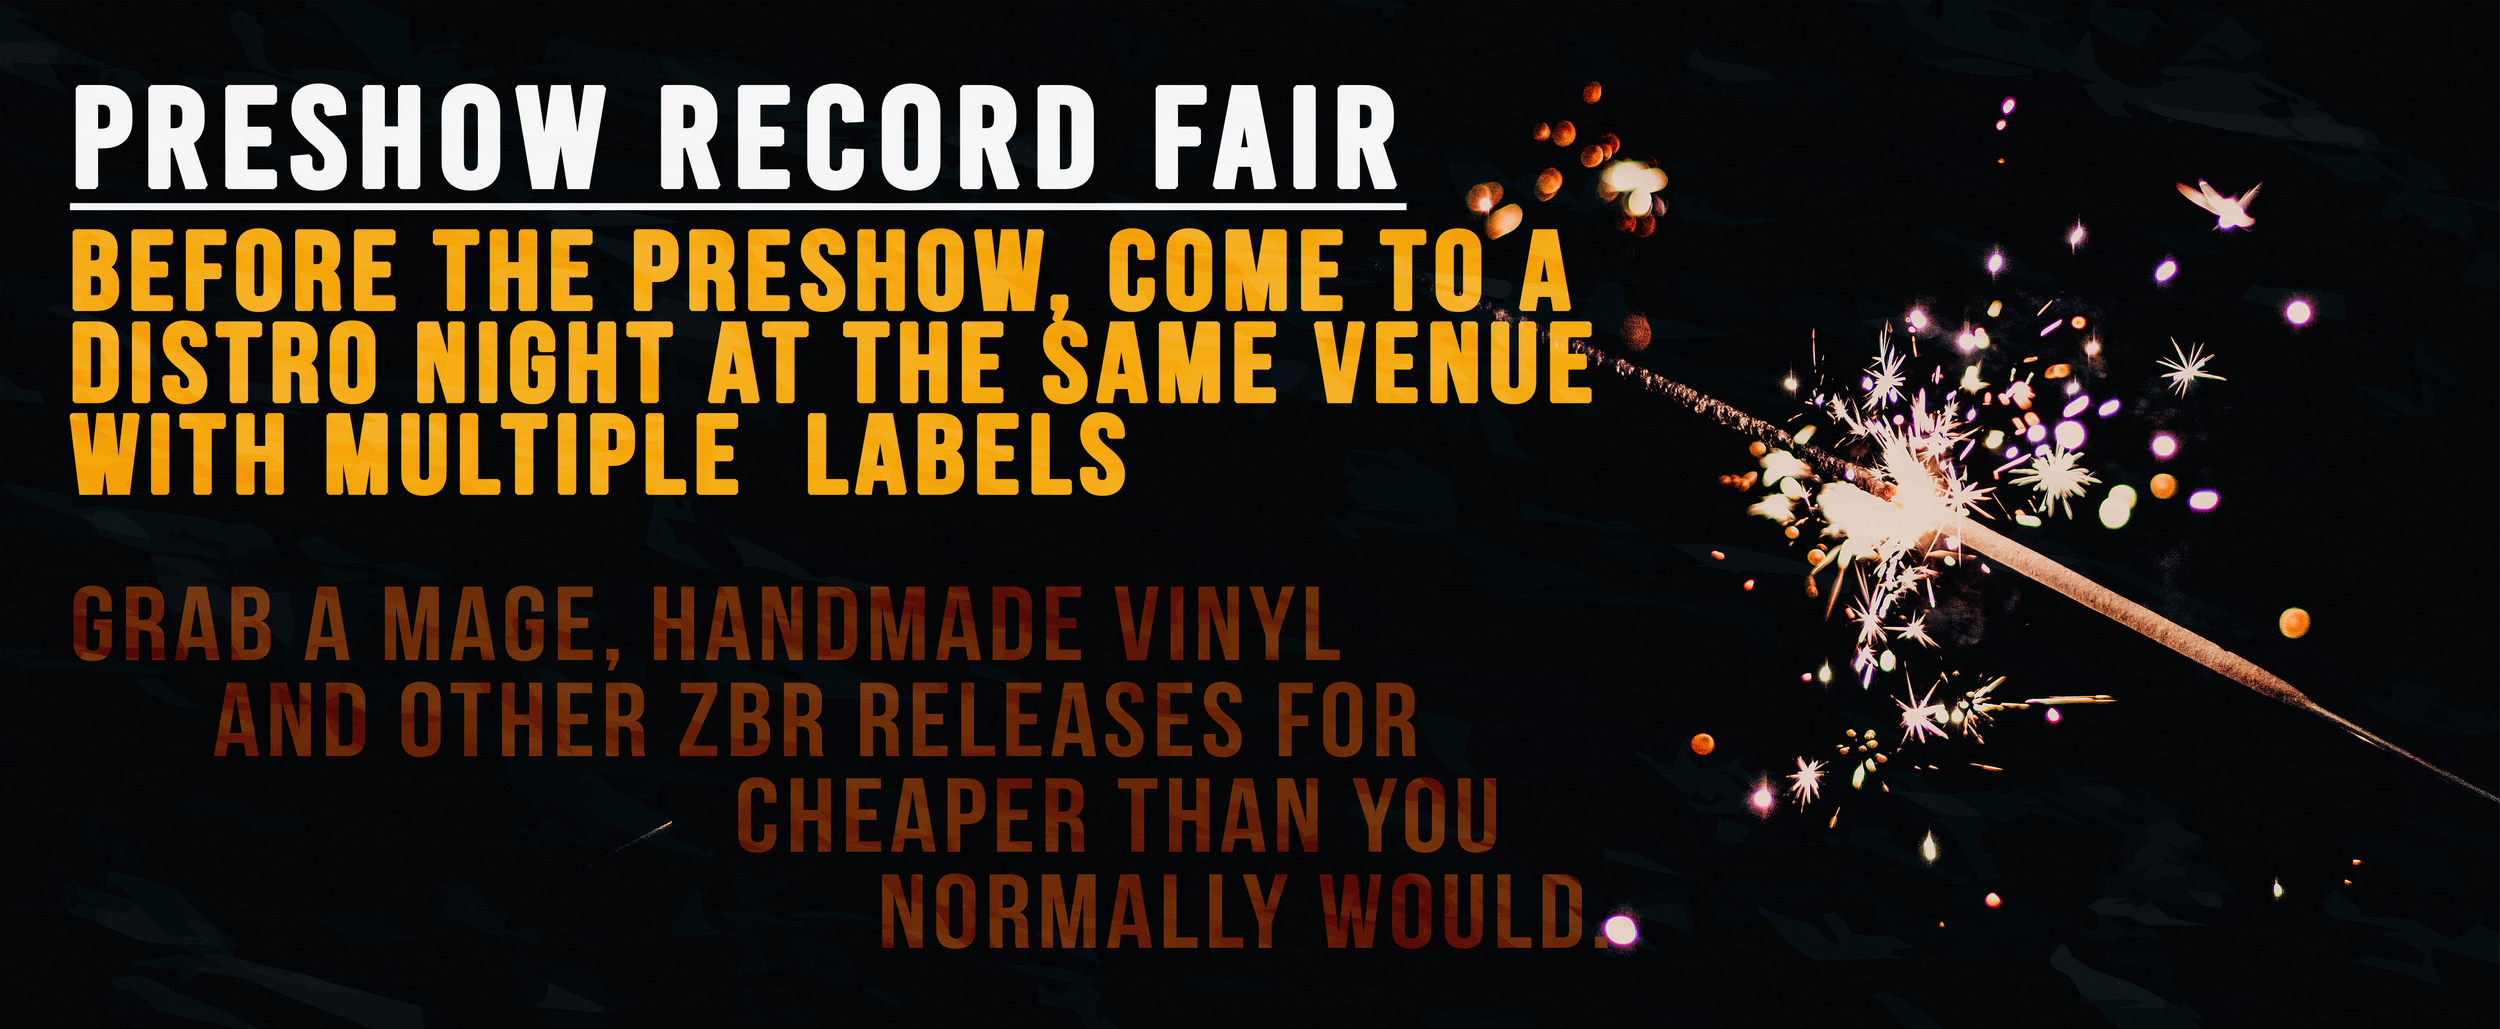 Single Day Preshow Record fair.png